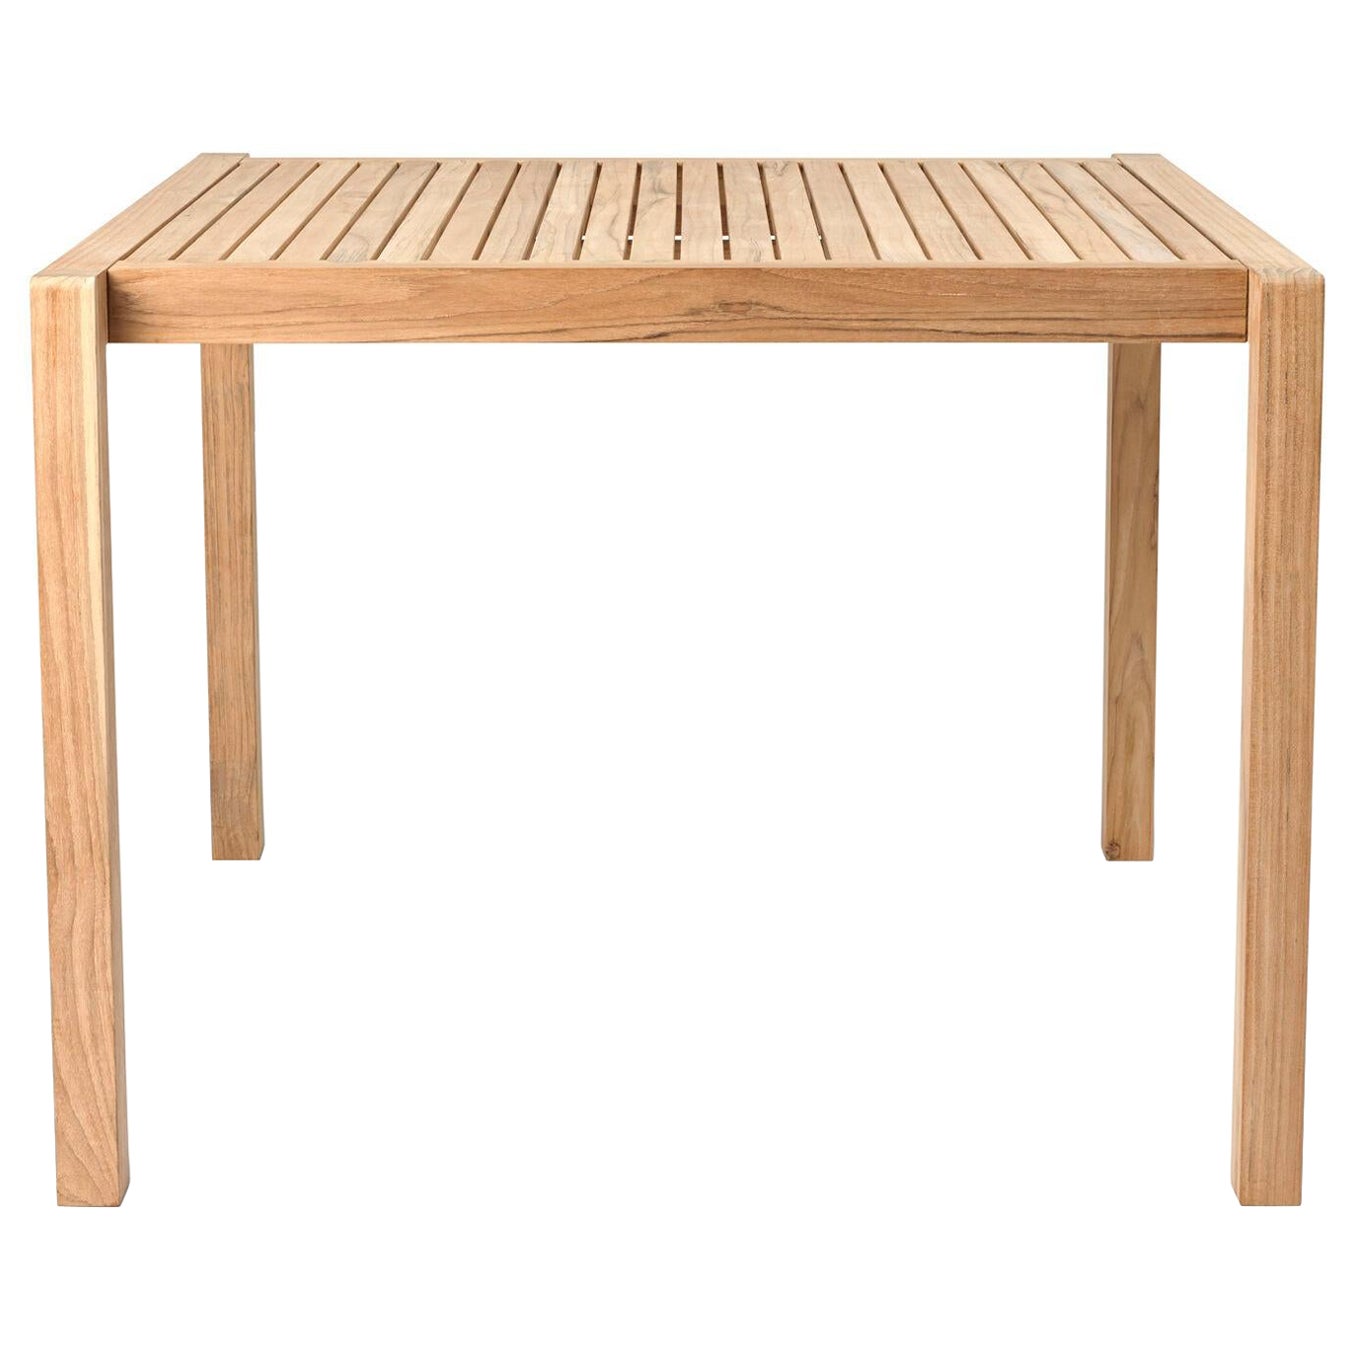 AH902 Outdoor Dining Table in Untreated Teak *Quickship* For Sale